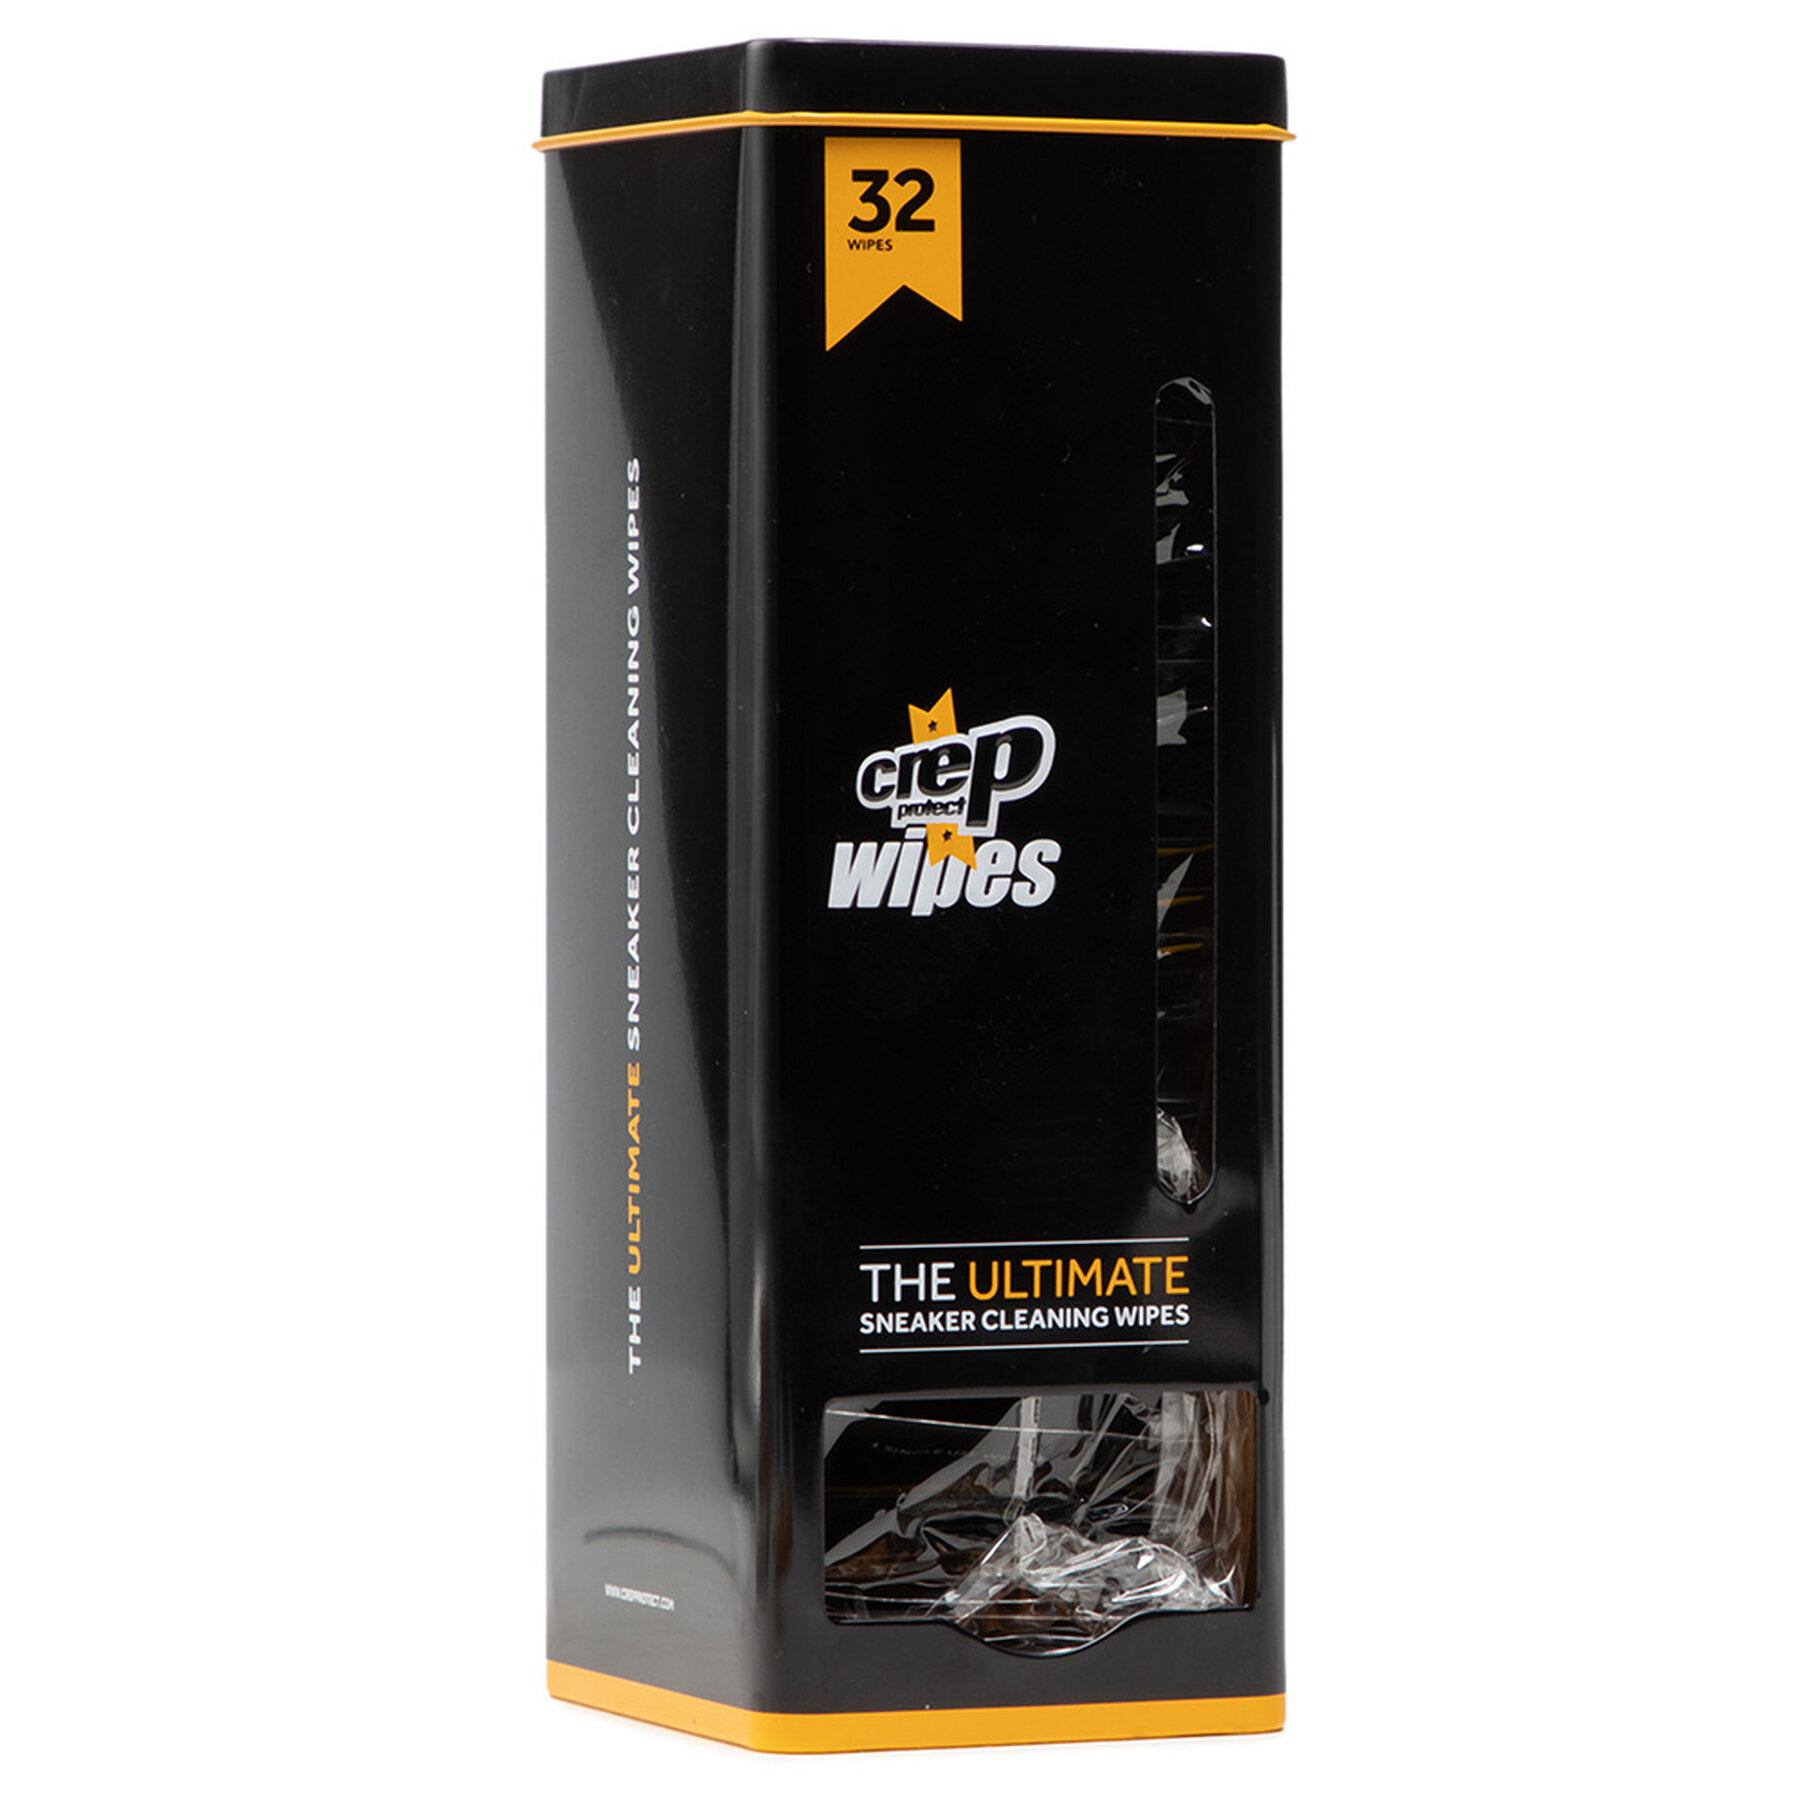 Reinigungstücher Crep Protect The Ultimate Sneaker Cleaning Wipes 32 Pack von Crep Protect